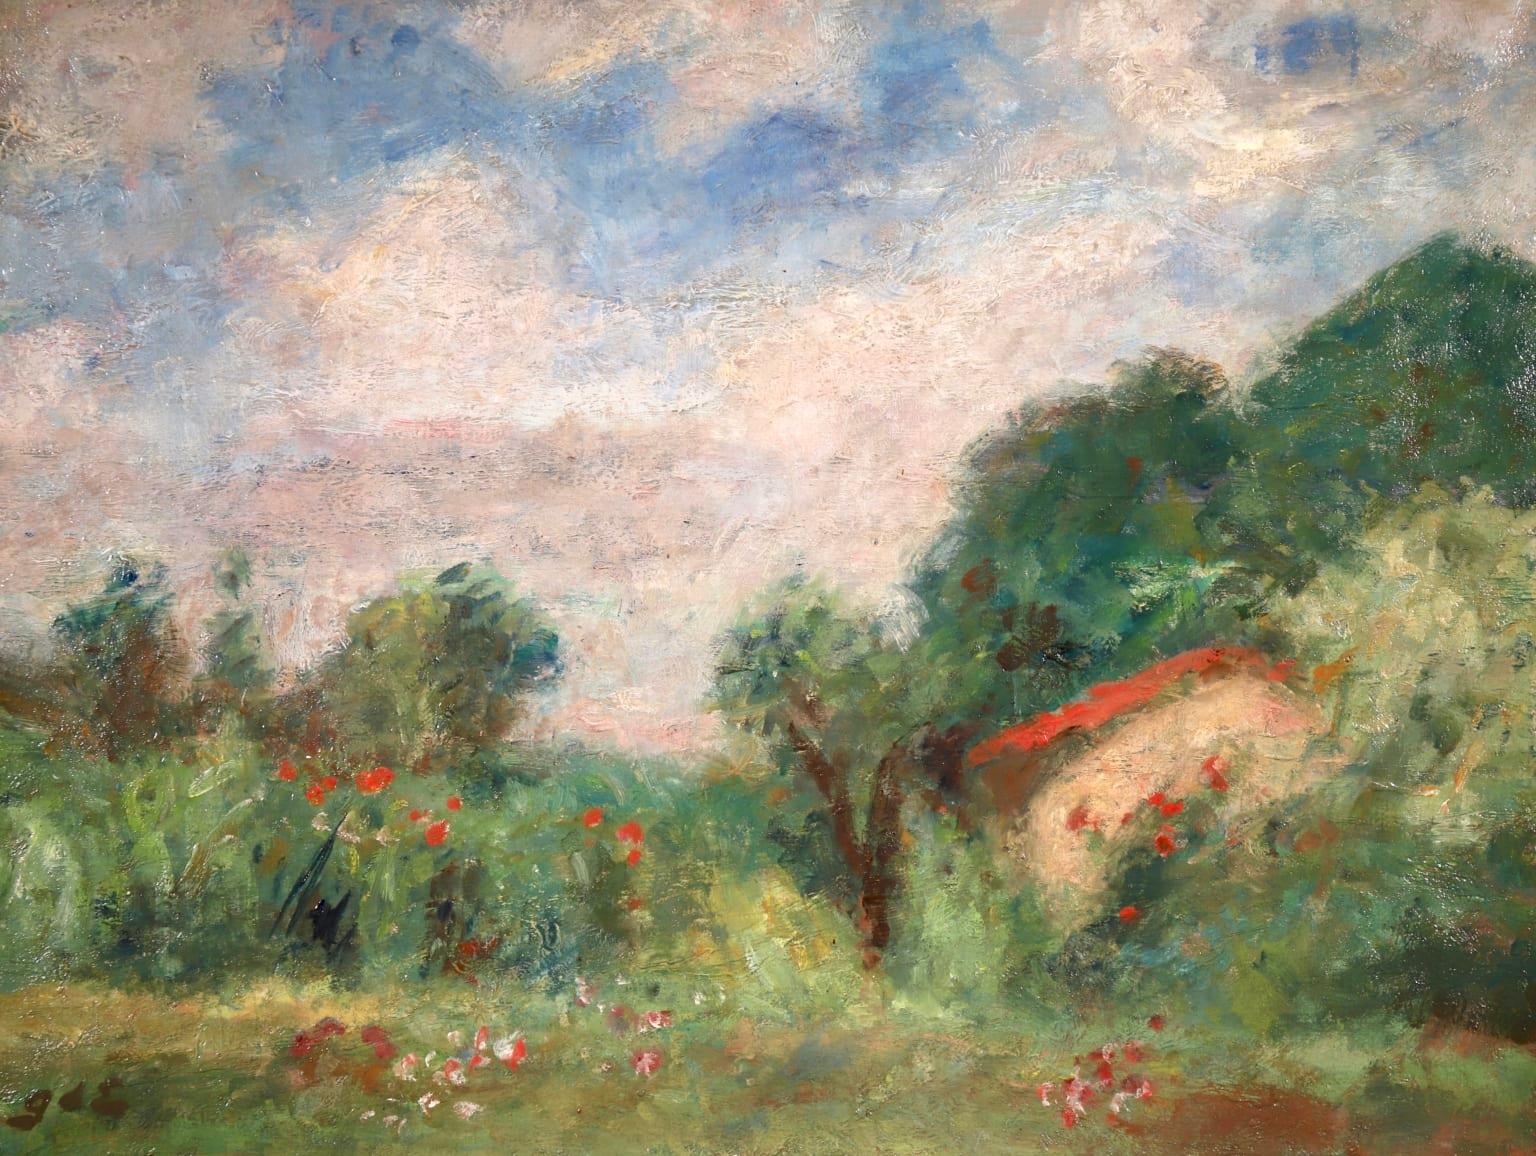 A beautiful oil on canvas circa 1930 by French post impressionist painter Georges D'Espagnat depicting a summer landscape. A red roofed-cottage is nestled within lush green trees, with red and white flowers scattered on the ground and in the bushes